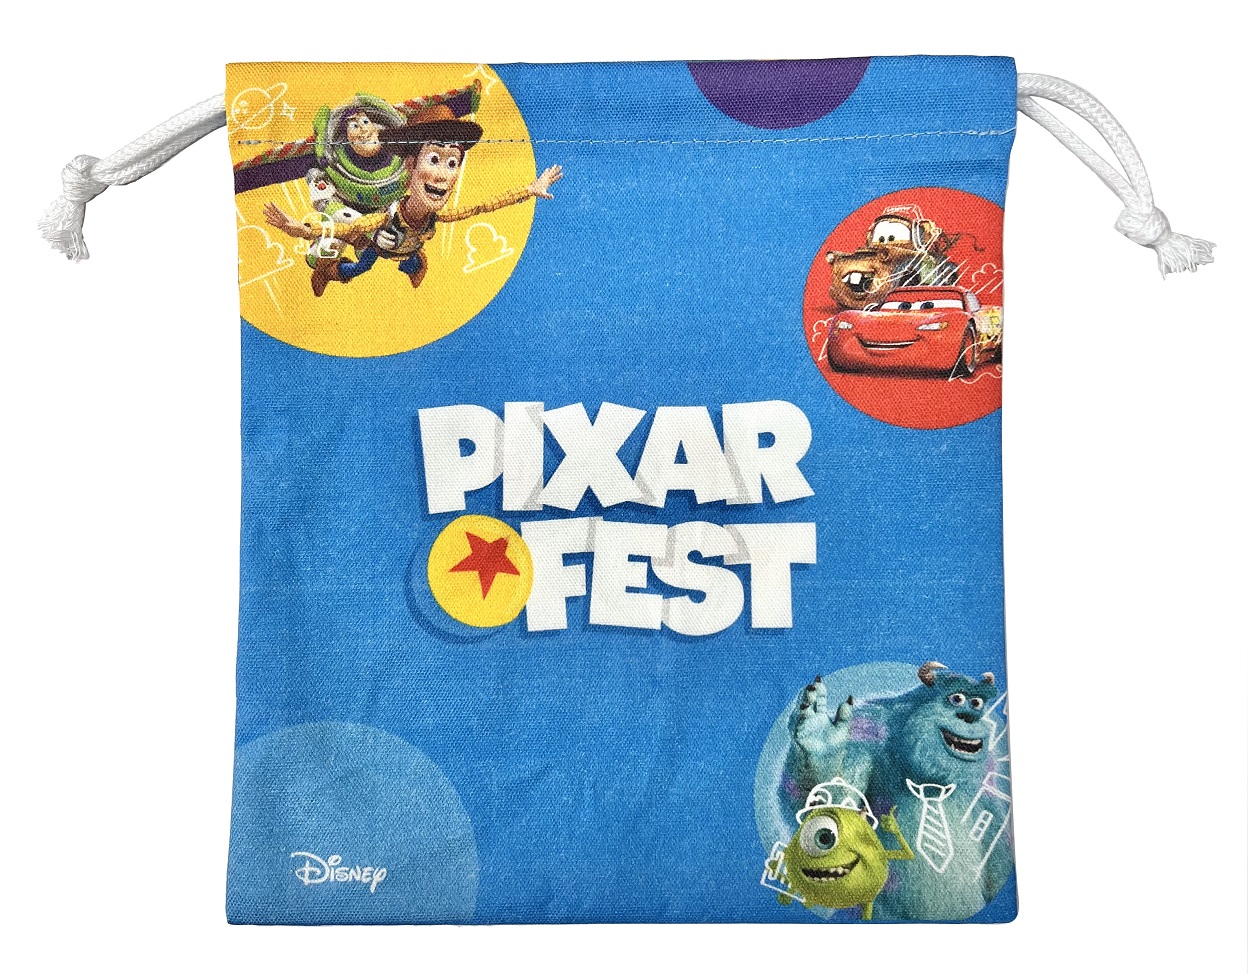 pixar-fest-pop-up-store-by-small-planet11-2